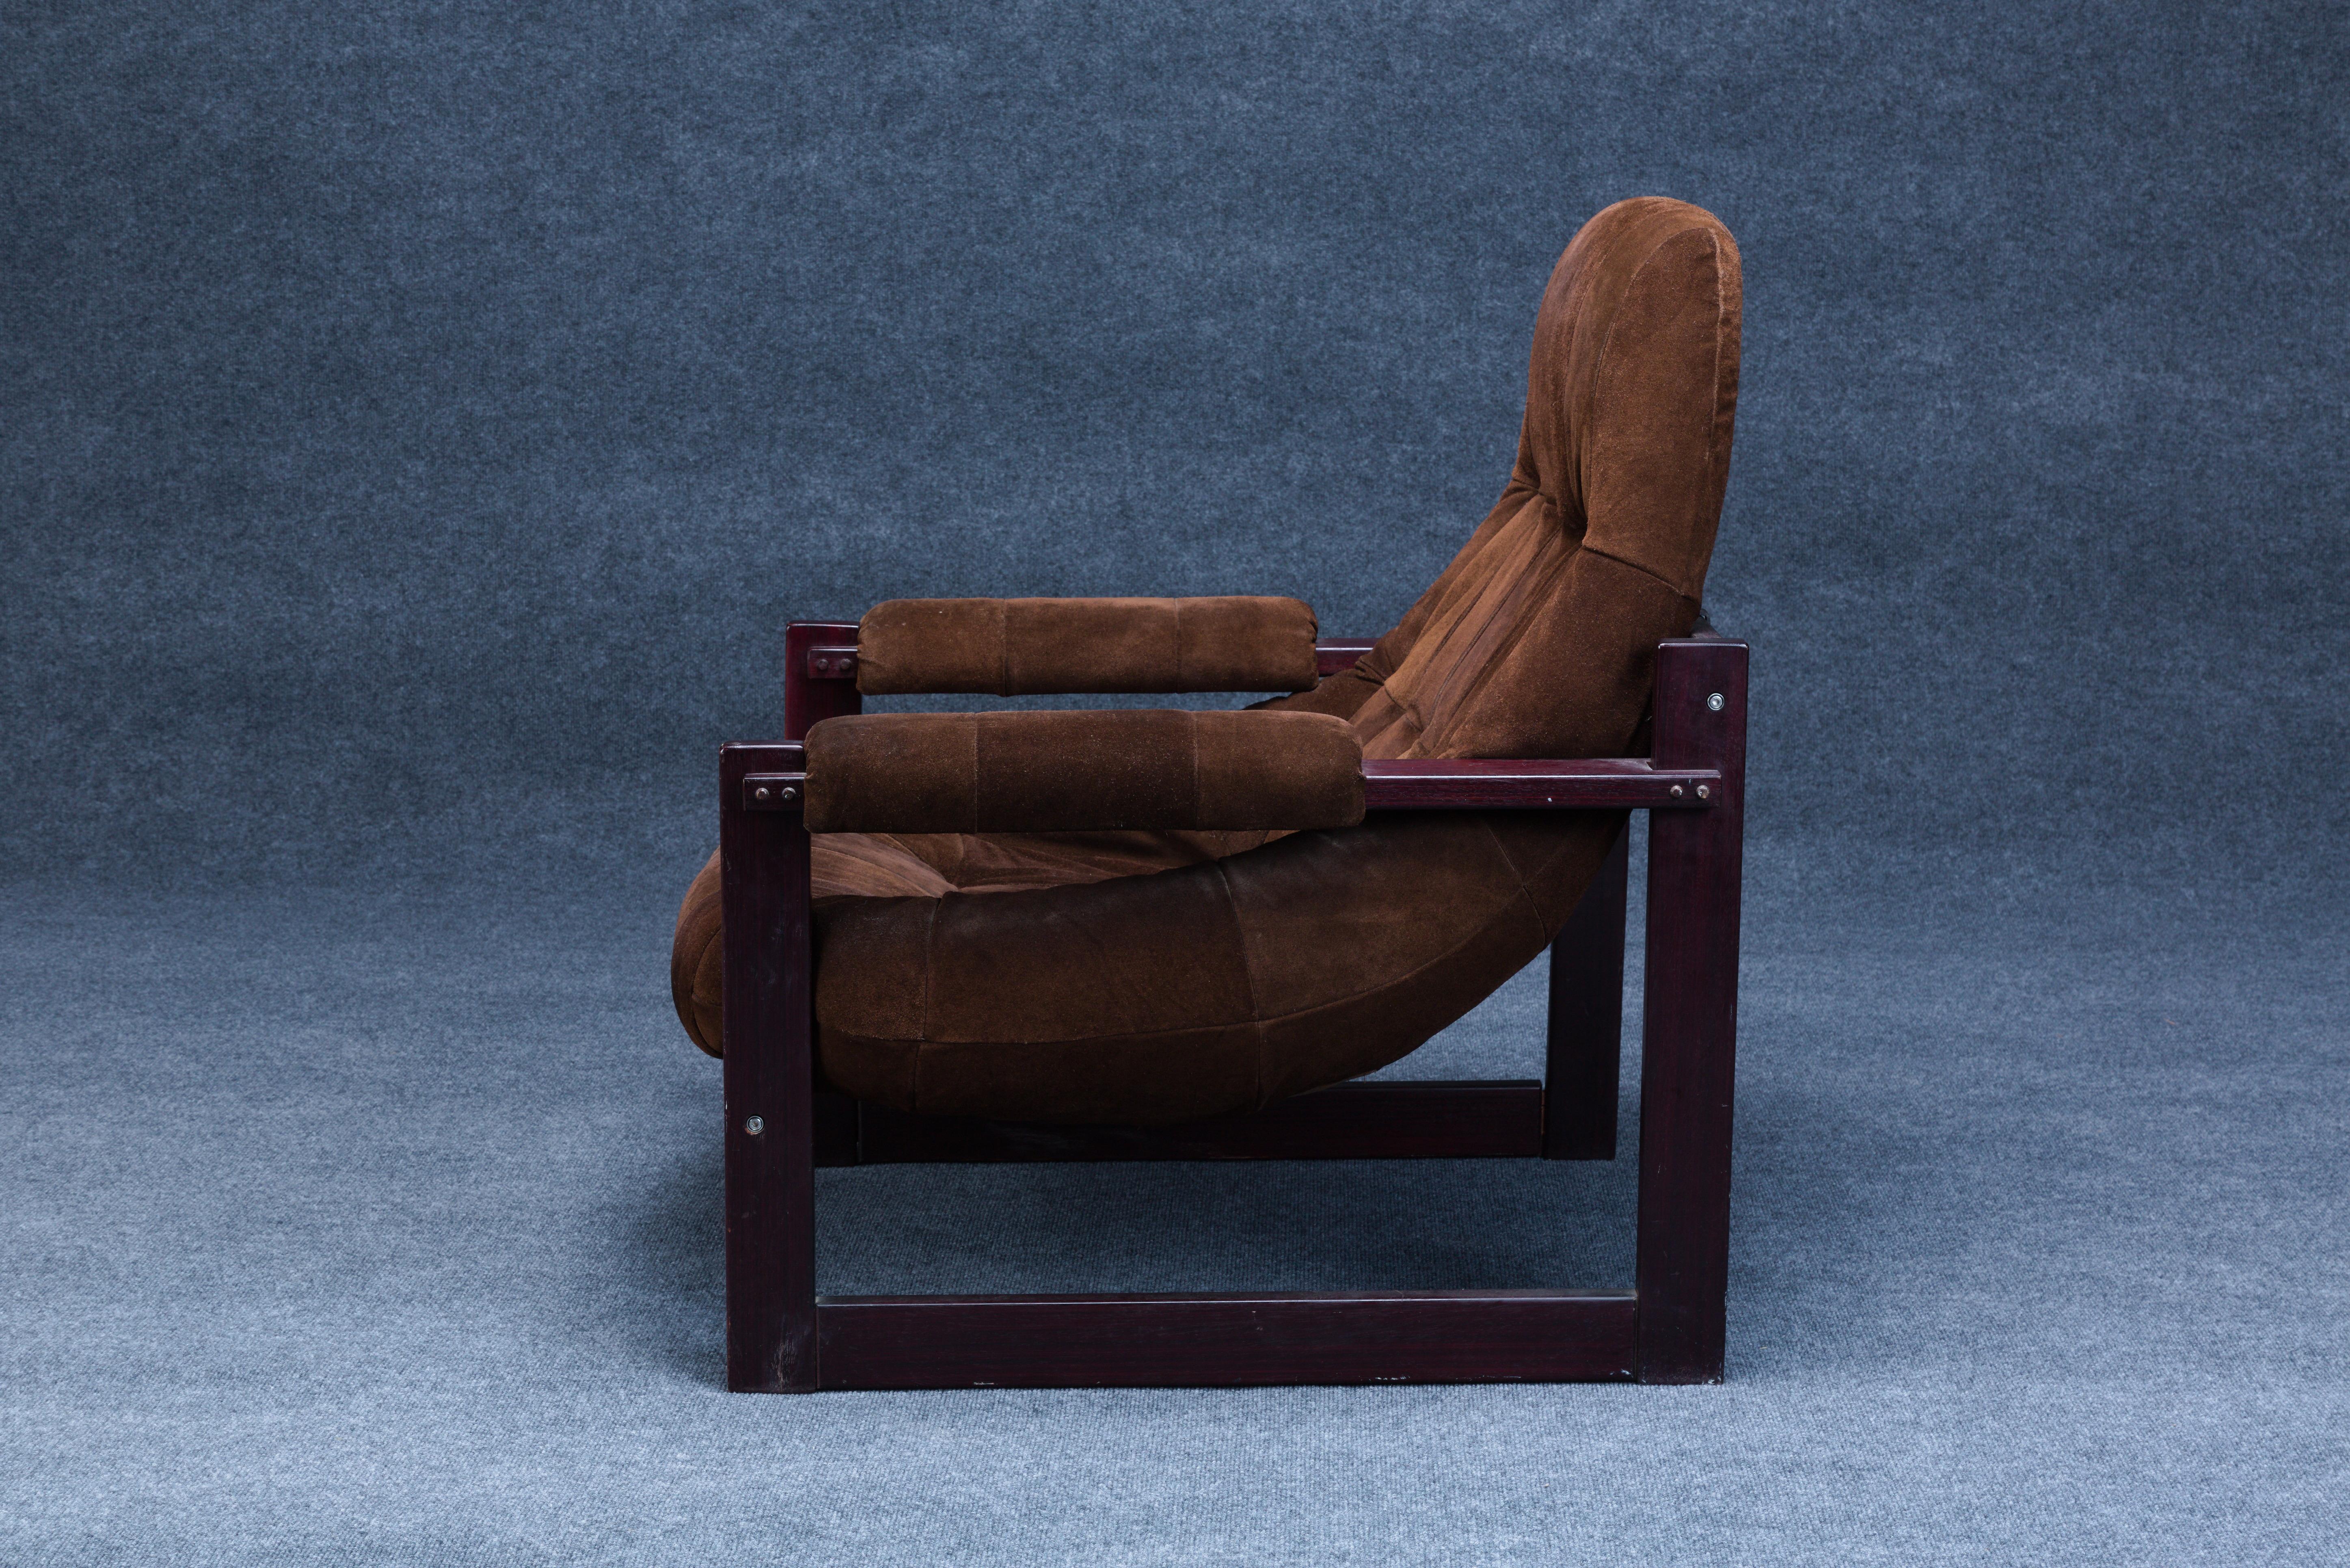 Mid-20th Century Brazilian Mid-Century Modern Armchair/Ottoman by Percival Lafer in Suede Leather For Sale